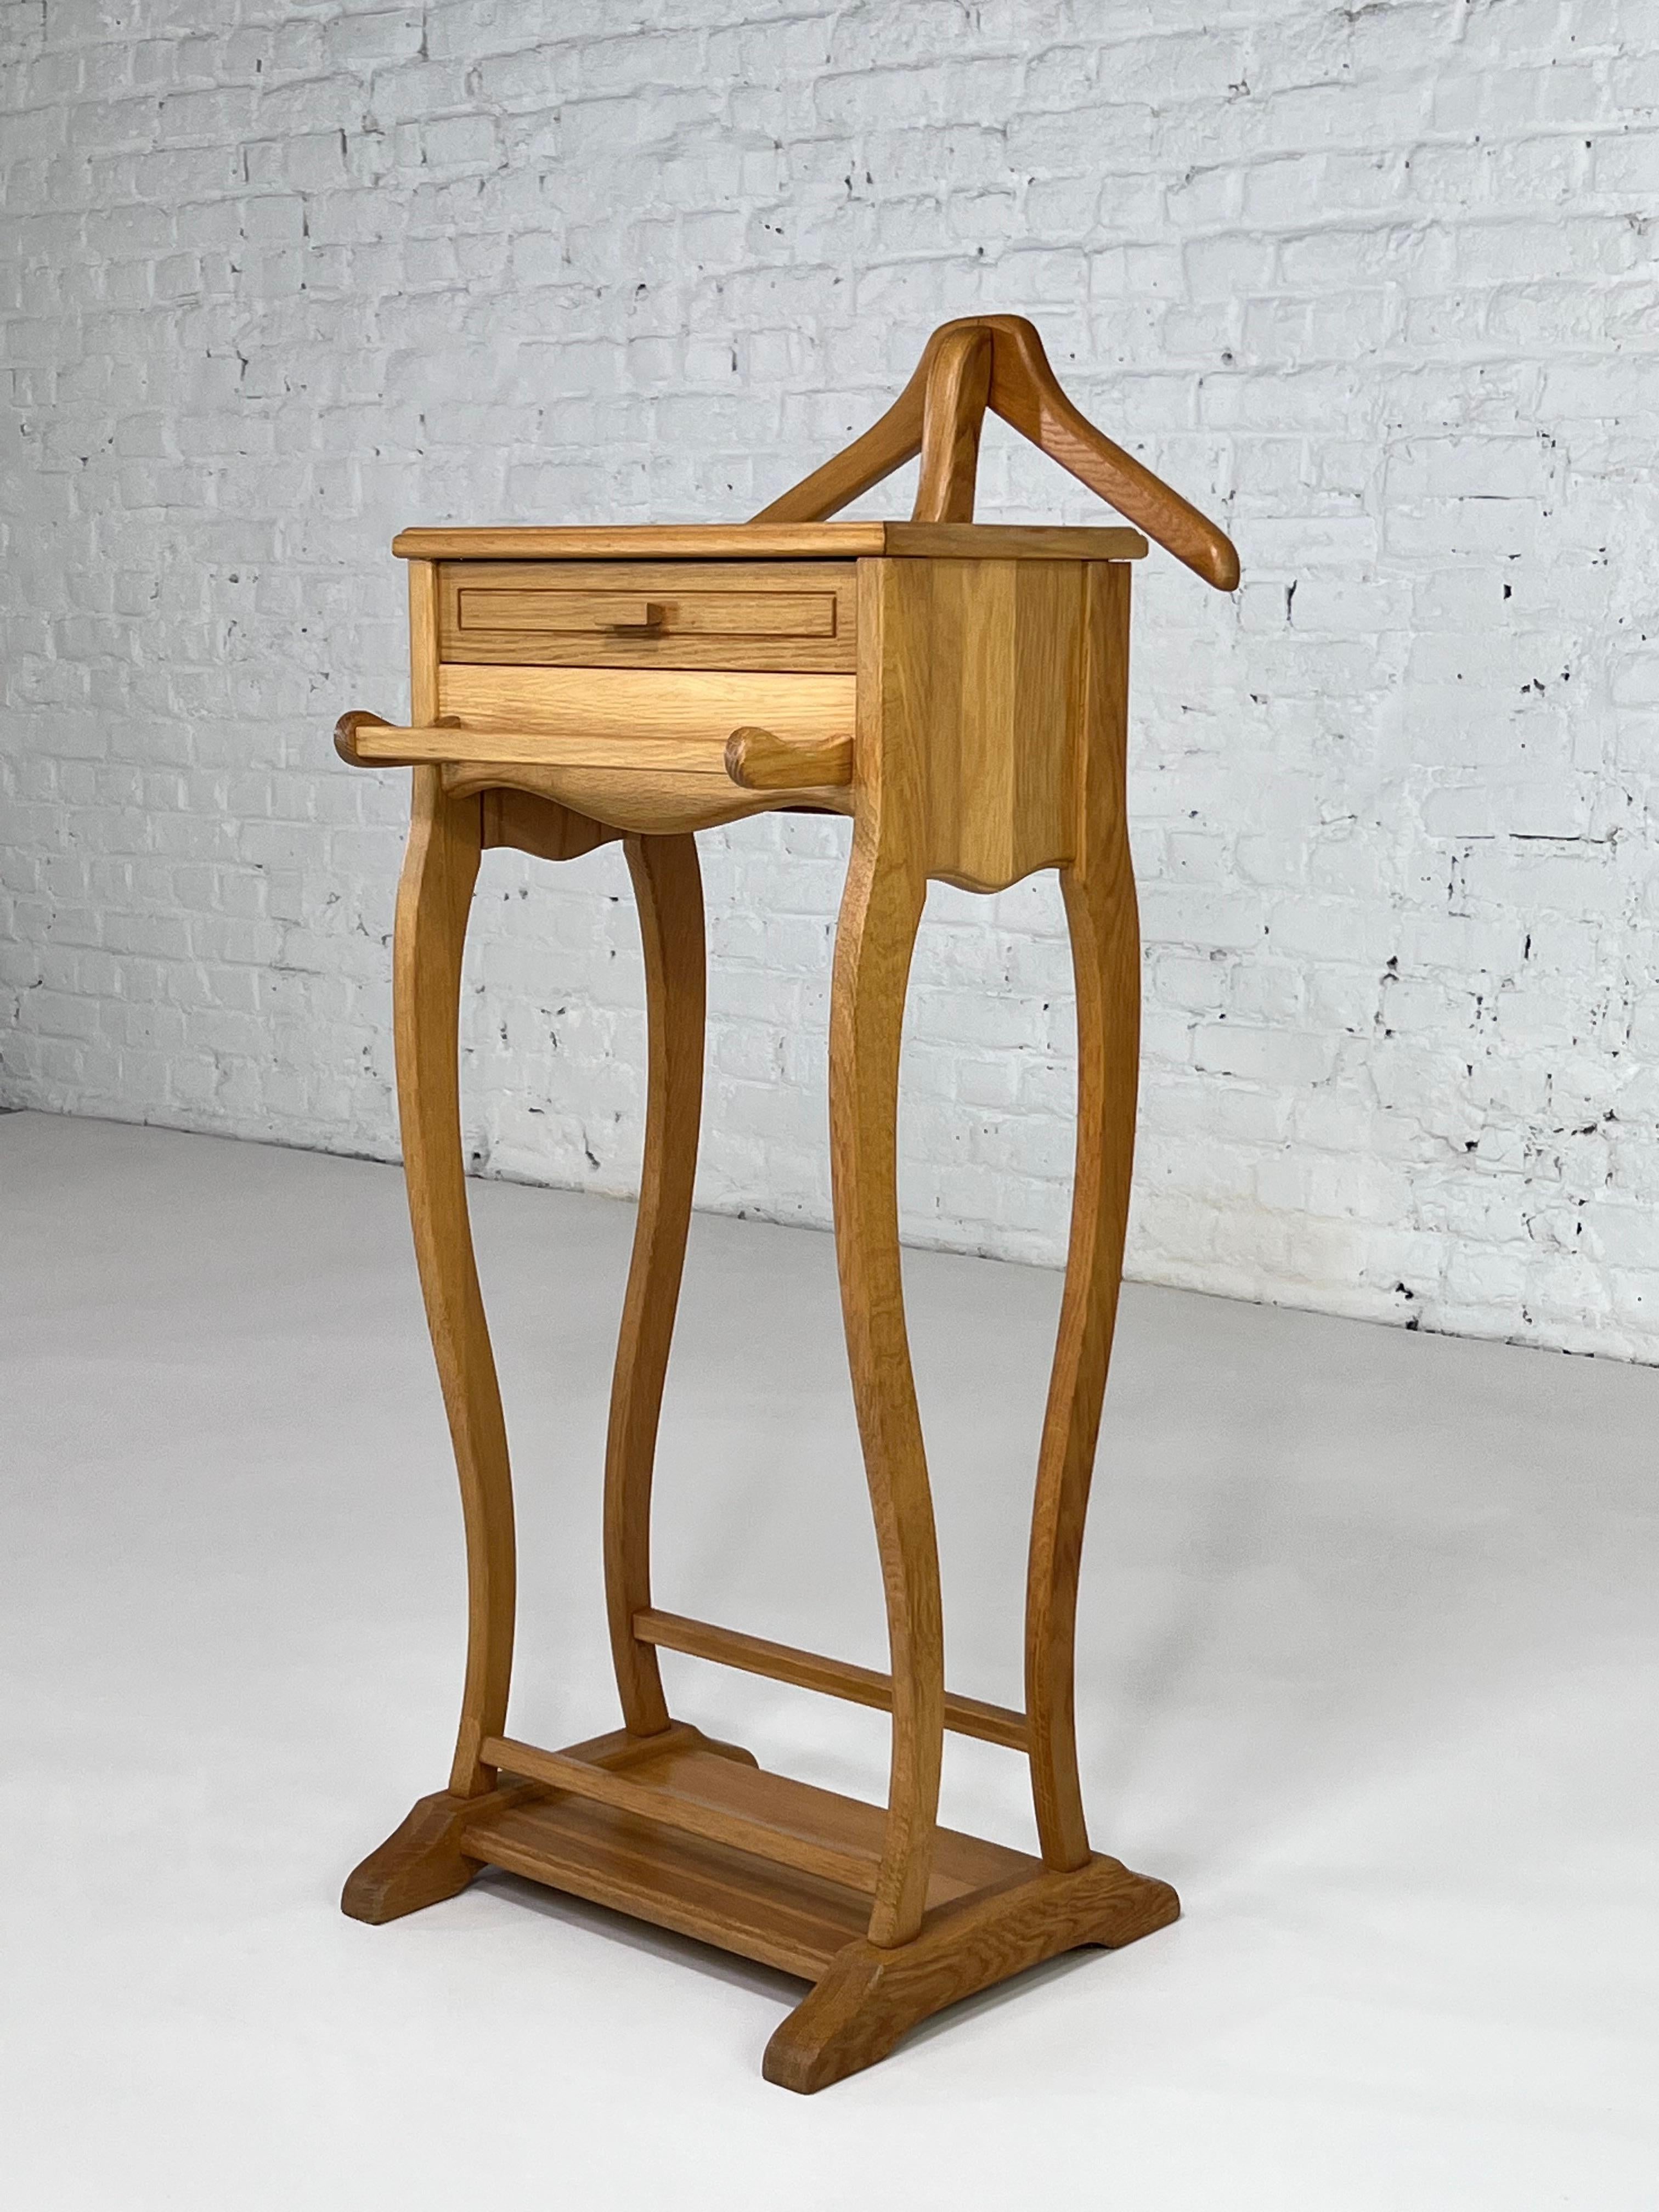 Design, graphic and pratical this Solid Oak Clothes Valet is in perfect condition.